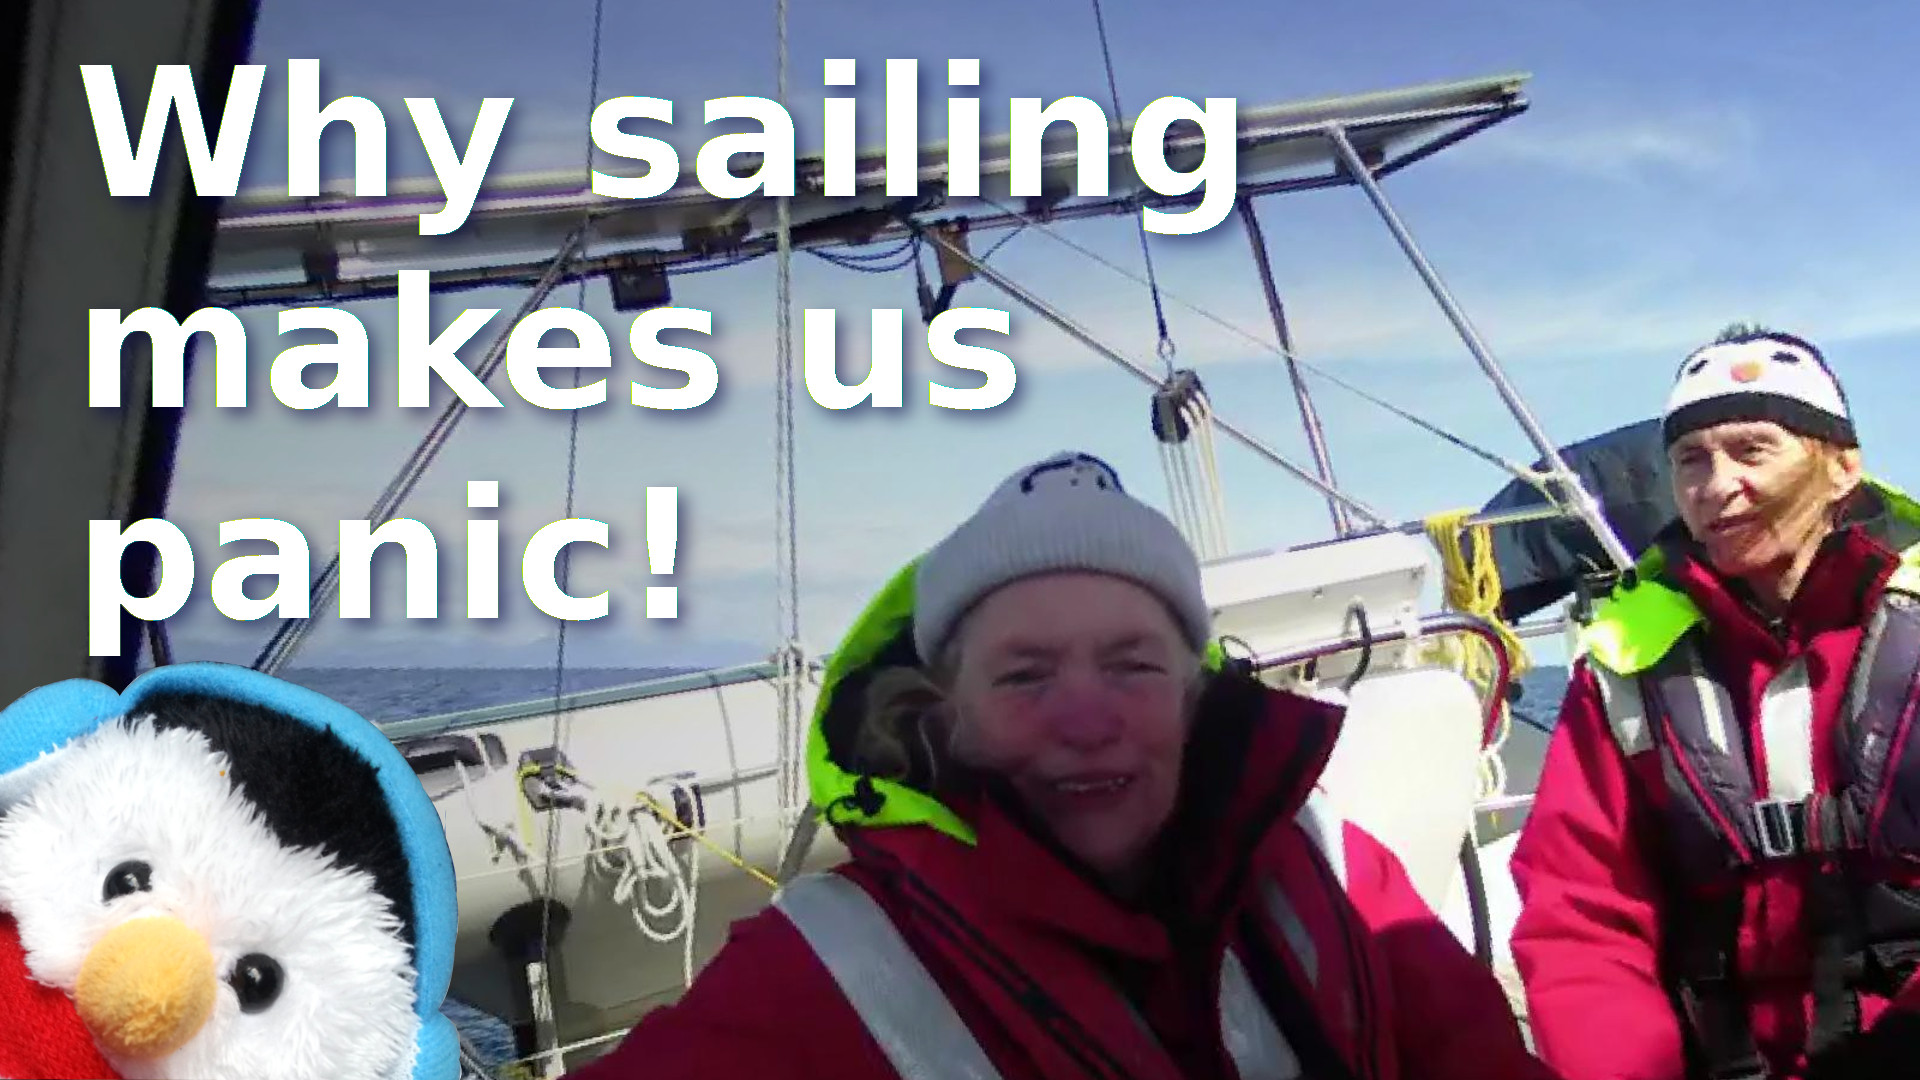 Watch our "Why sailing makes us panic!" video and add comments